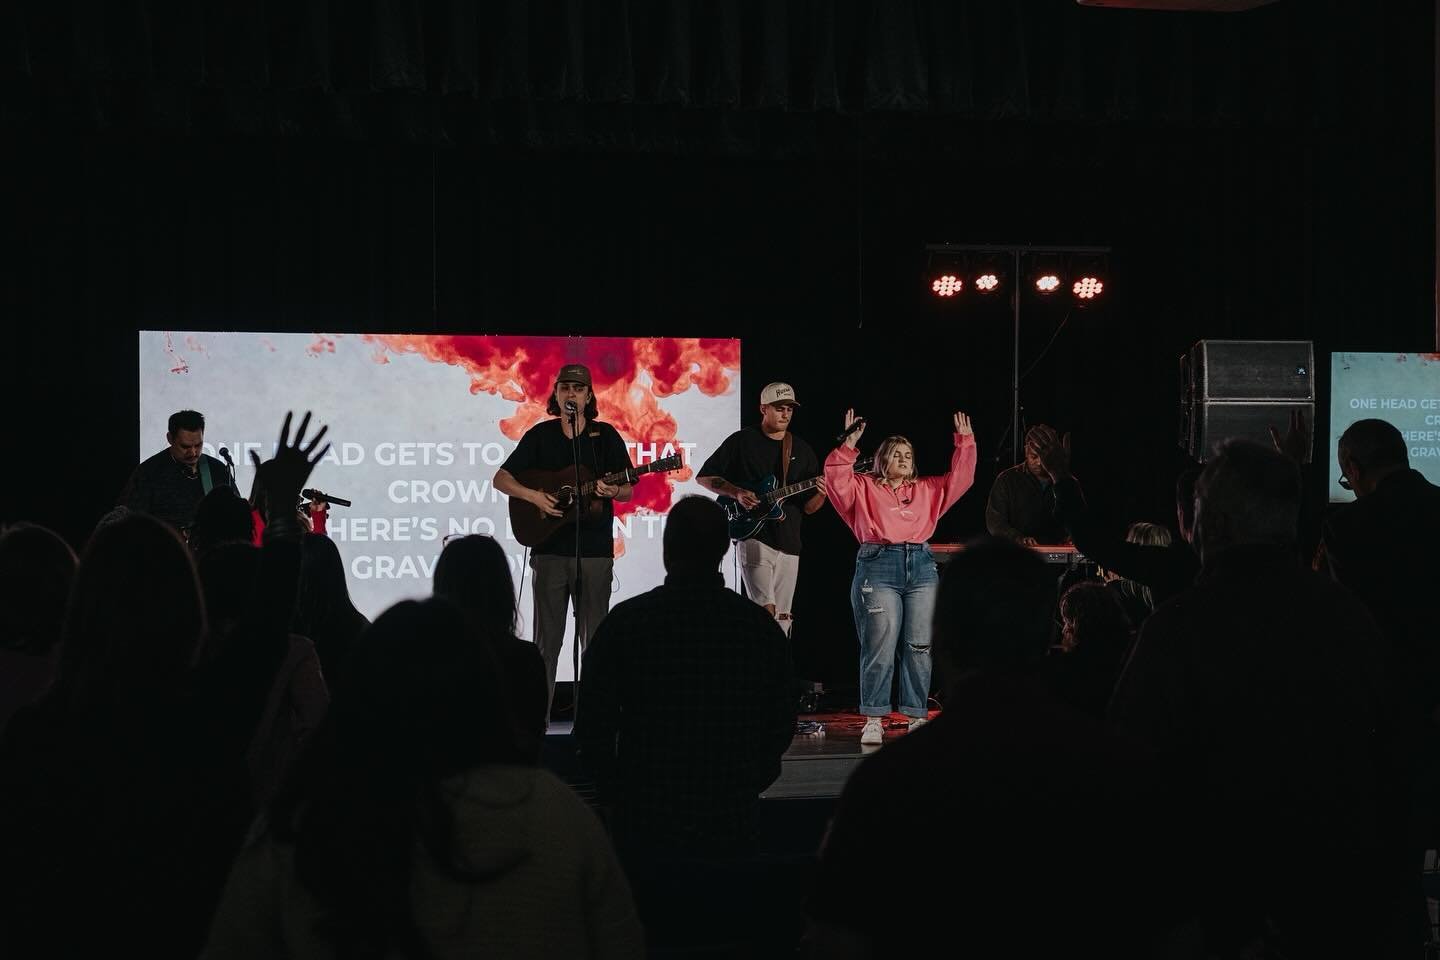 We are eagerly awaiting tomorrow morning as we lean into an extended time of worship along with communion and teaching in between. It&rsquo;s going to be a special time together as we lean into His presence!
 
P.S. GC Kids will be starting their new 